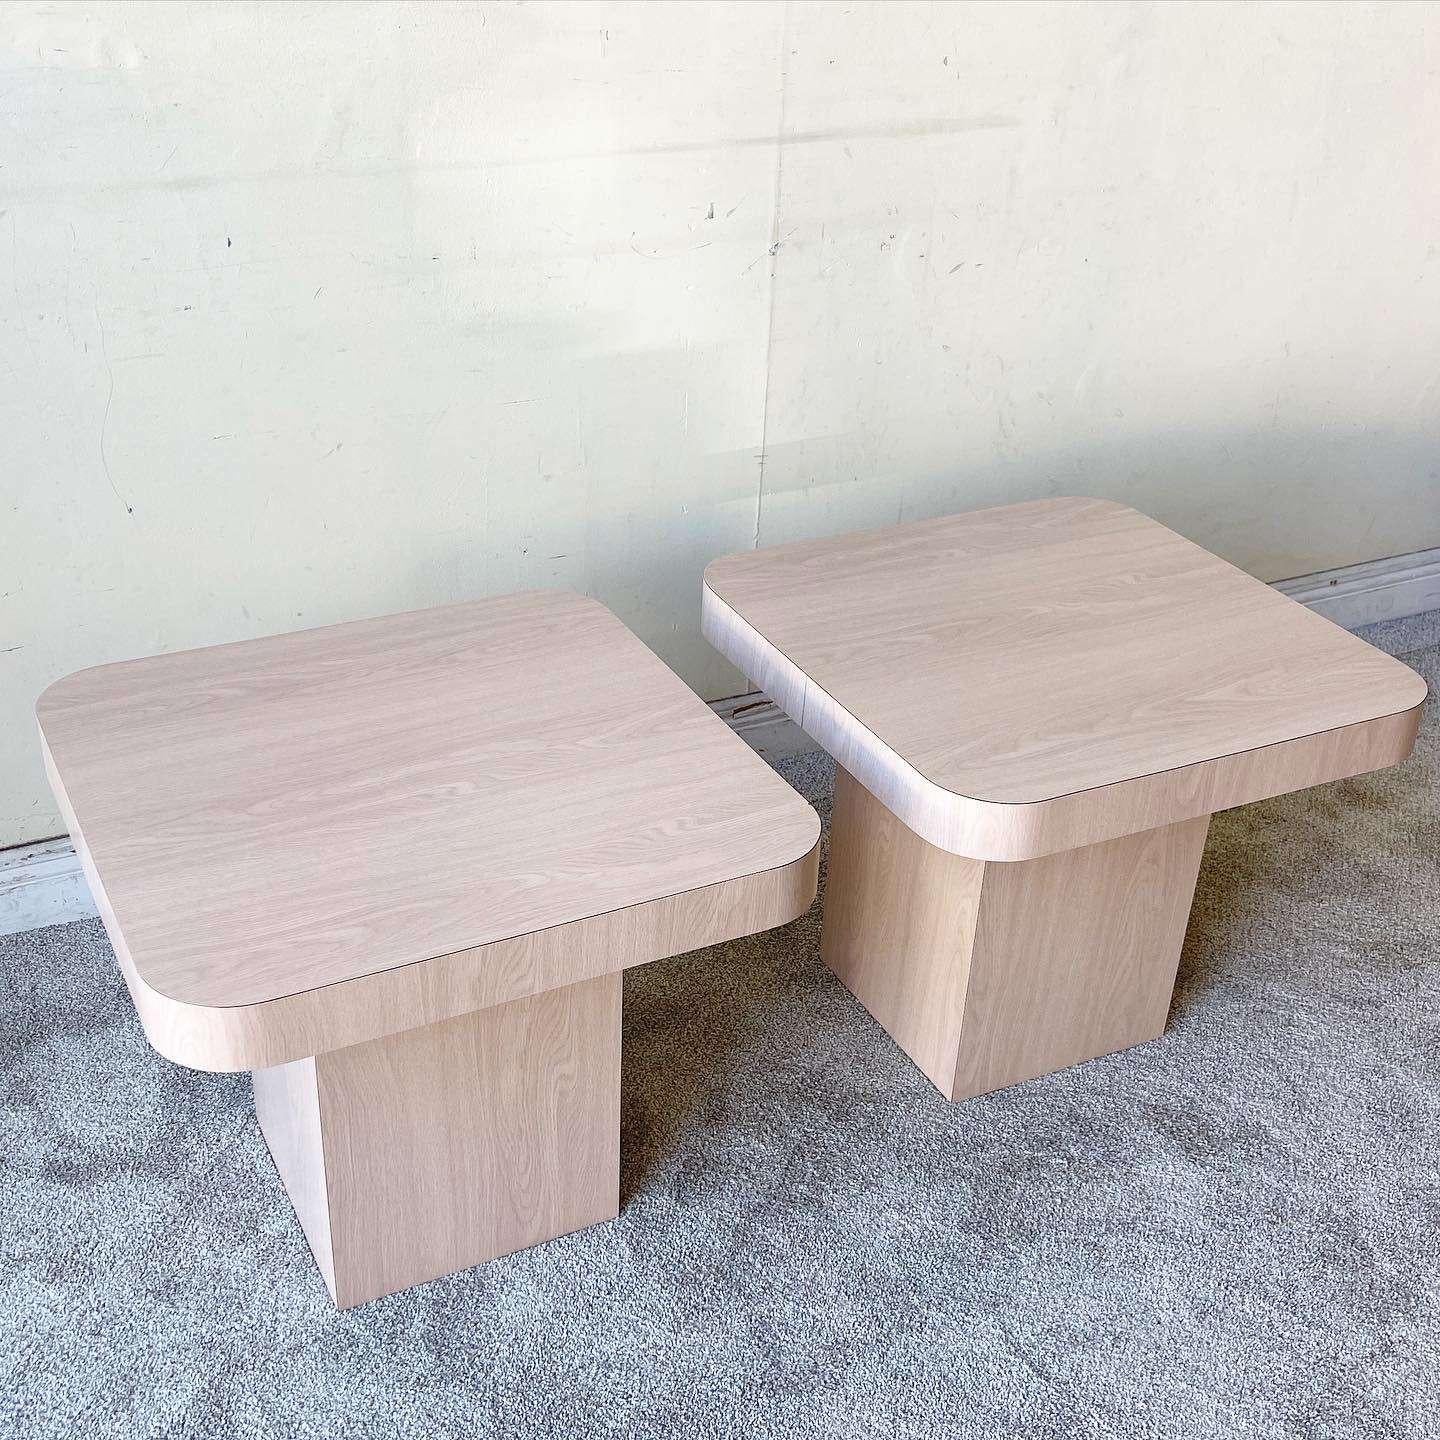 Exceptional pair of postmodern mushroom side/end tables. Features a “washed” Woodgrain laminate with rounded corners.